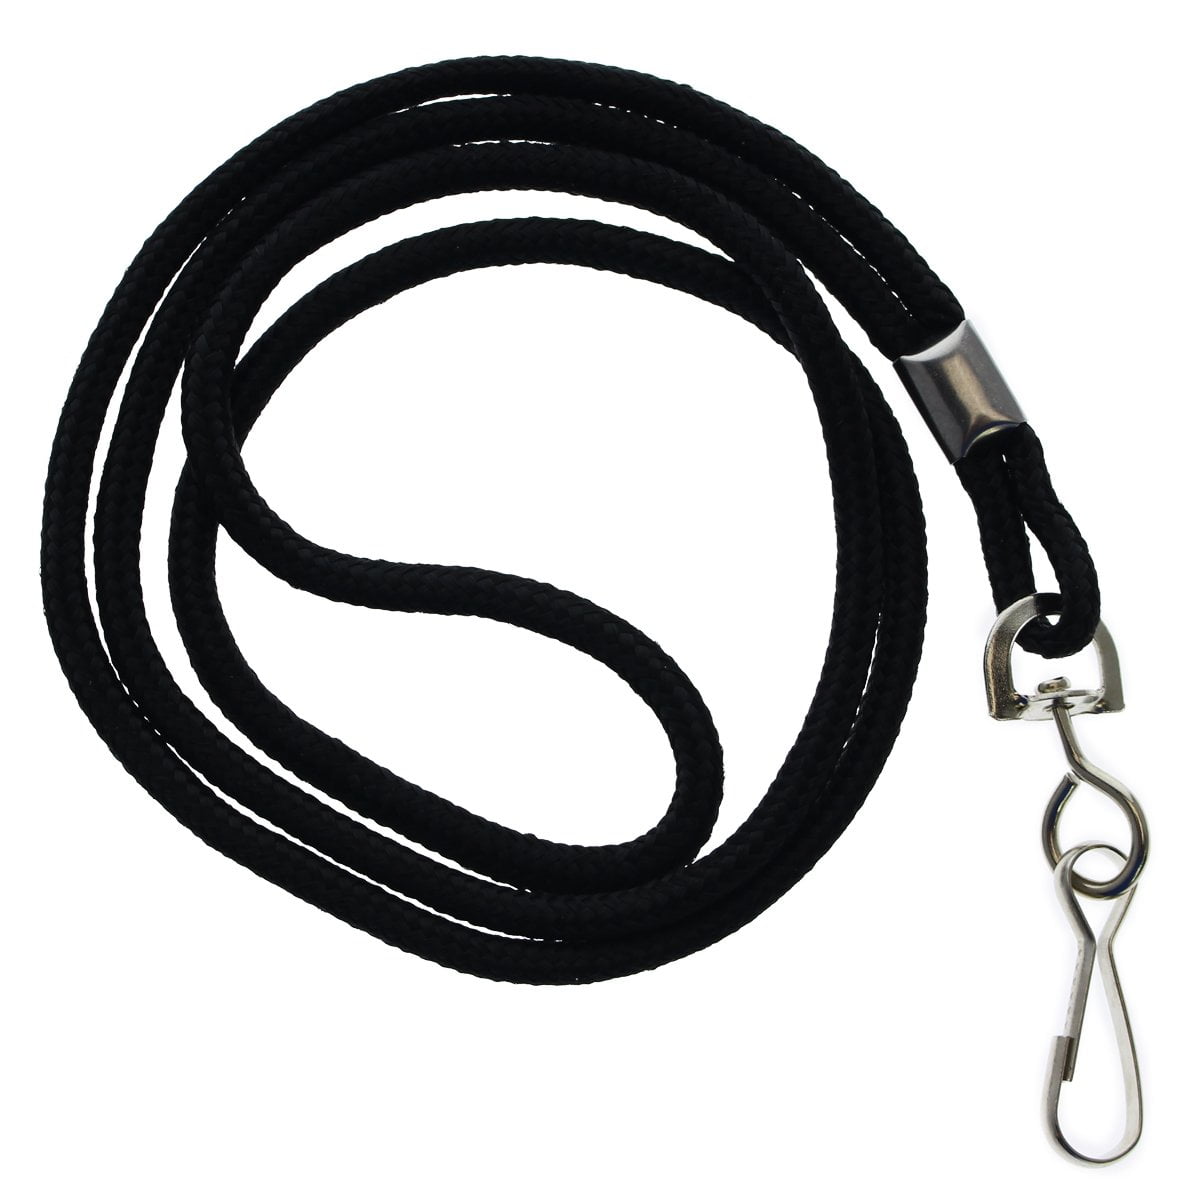 2 Lanyard Neck Strap ID Badge Holder Round Rope Style on for sale online 